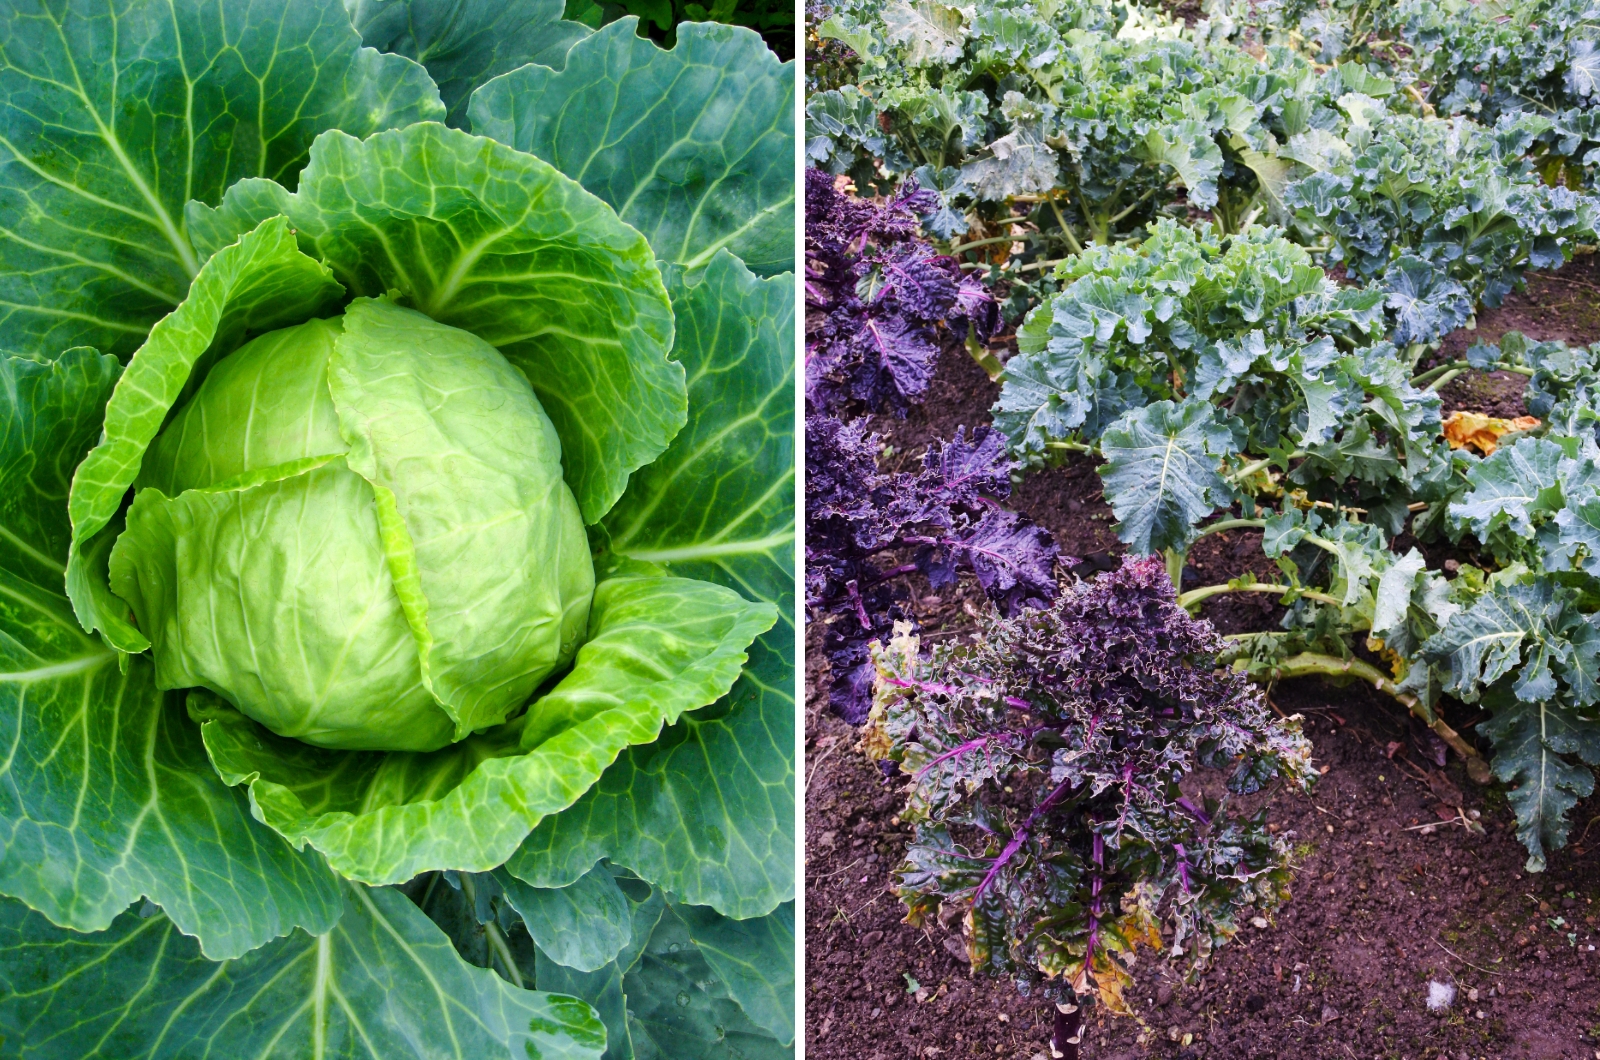 Cabbage & Other Brassicas